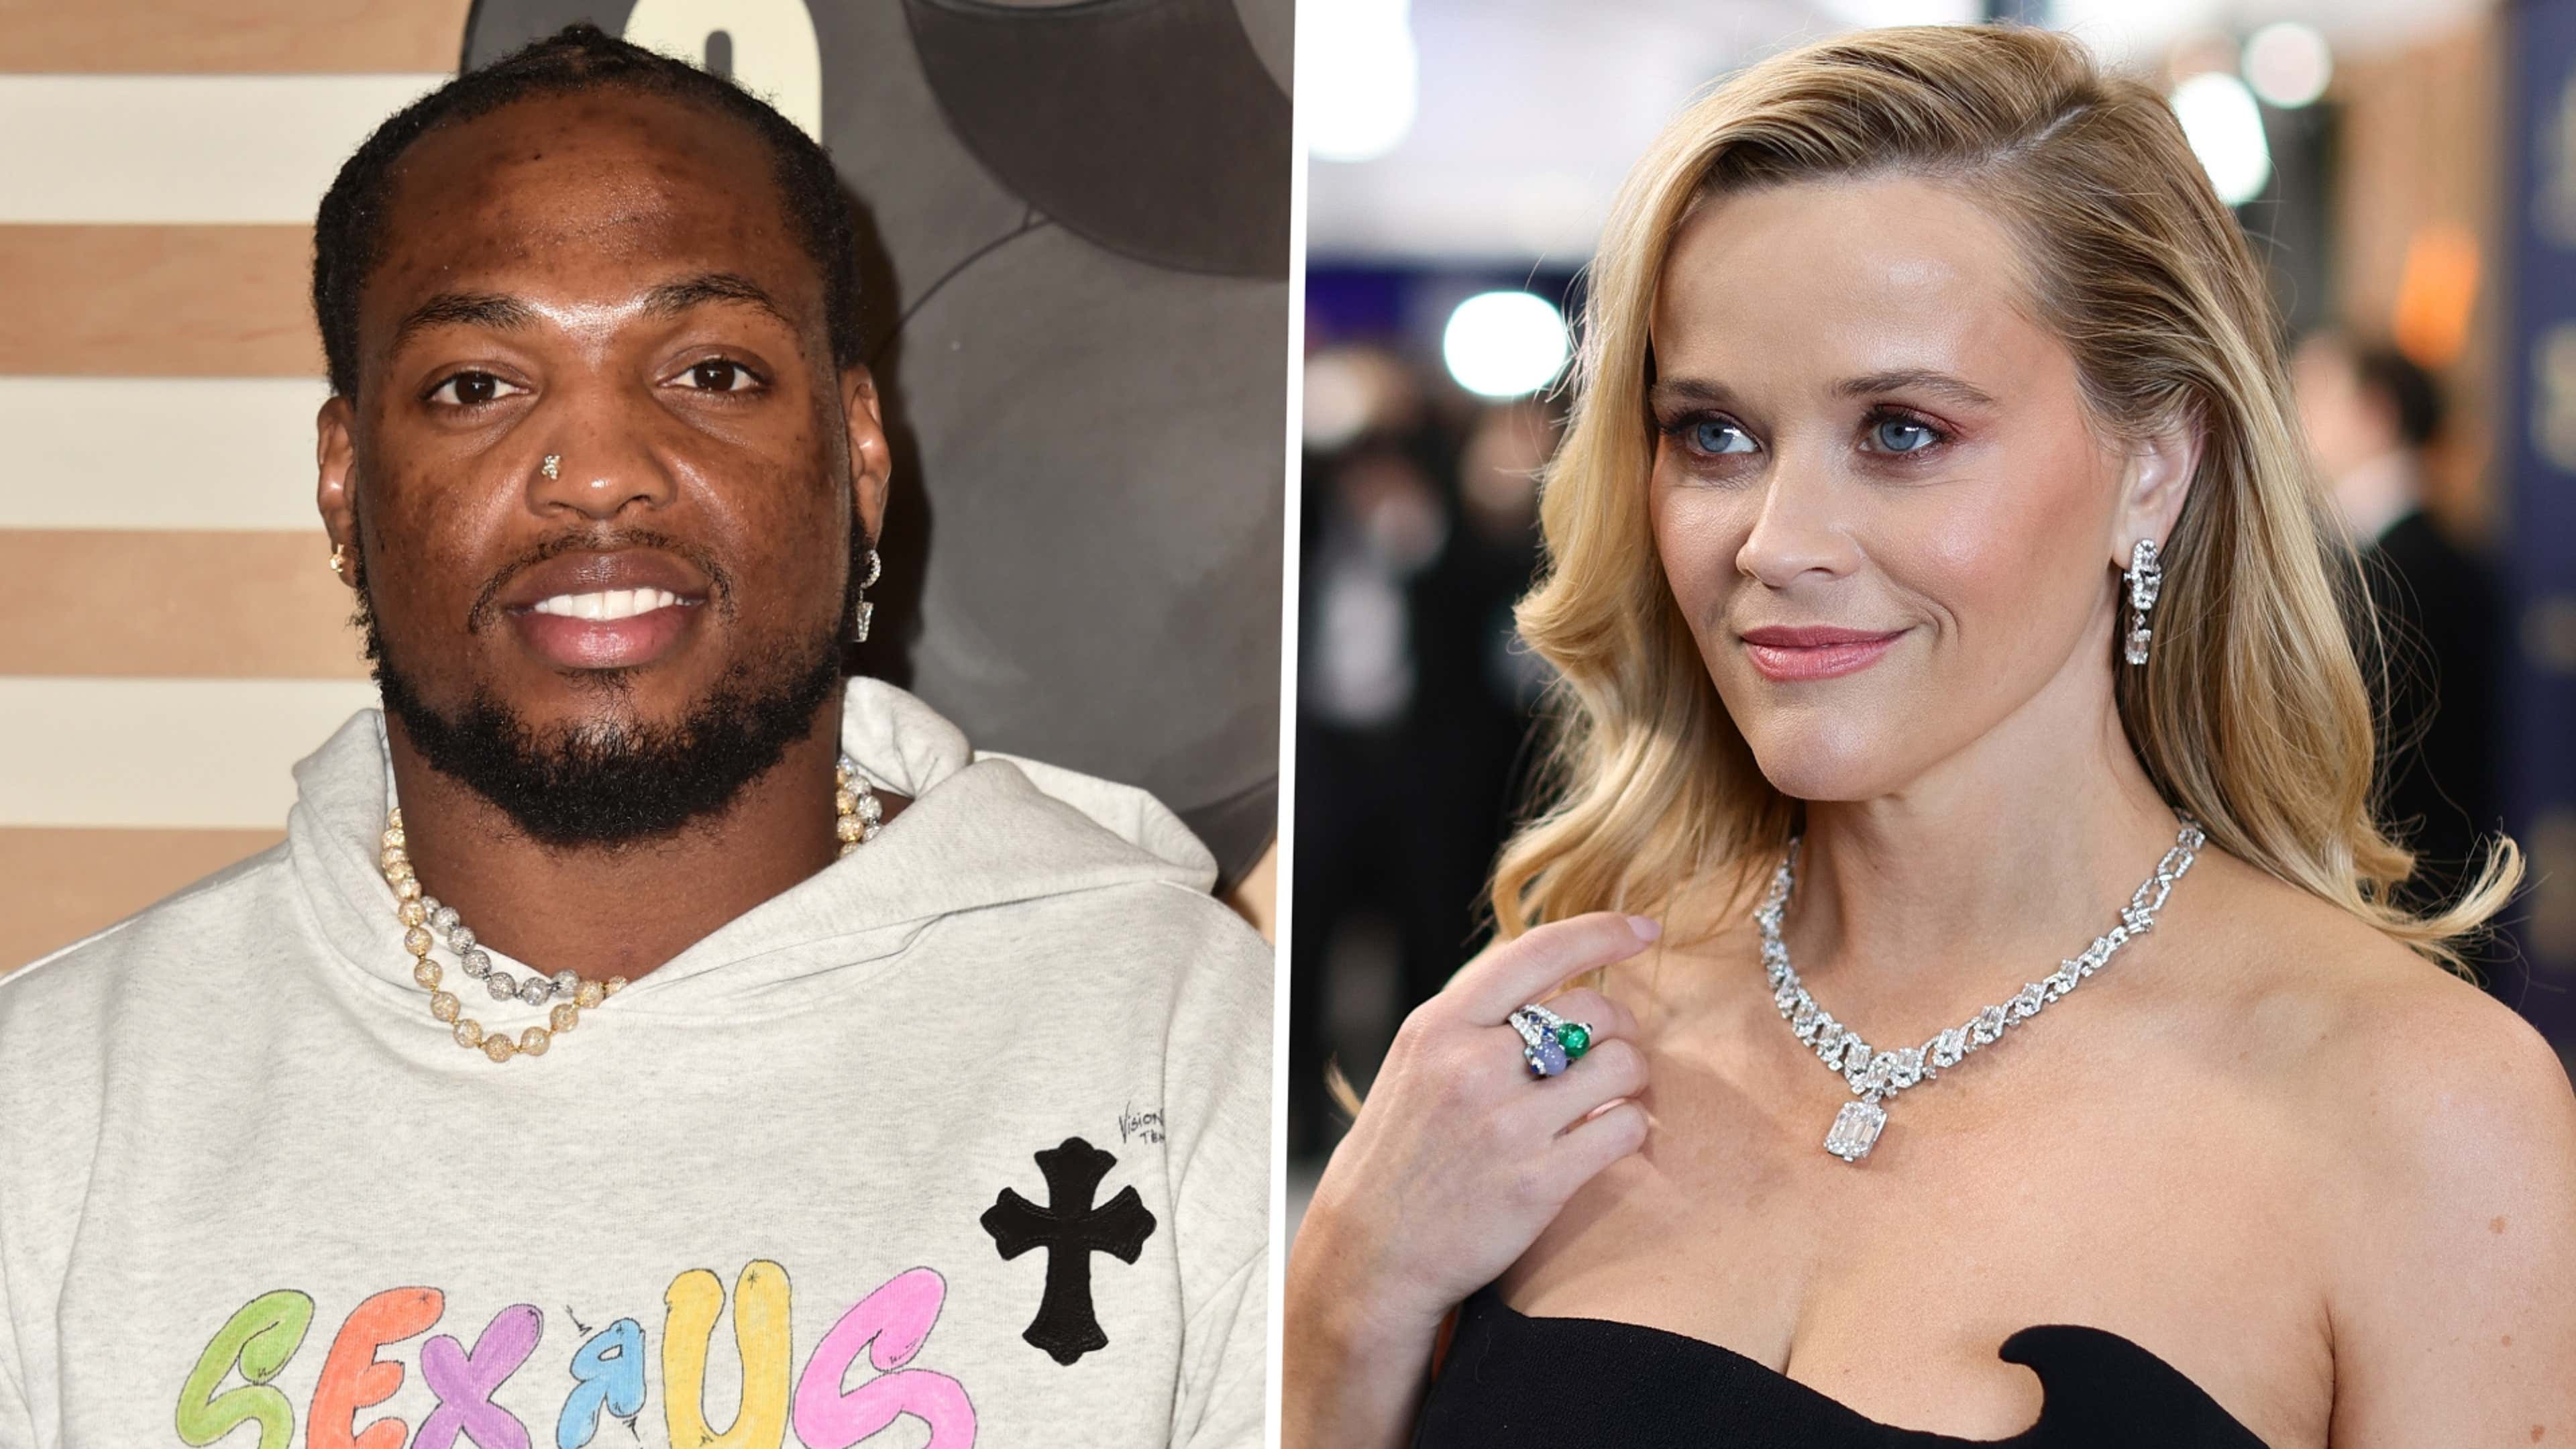 Derrick Henry, Reece Witherspoon